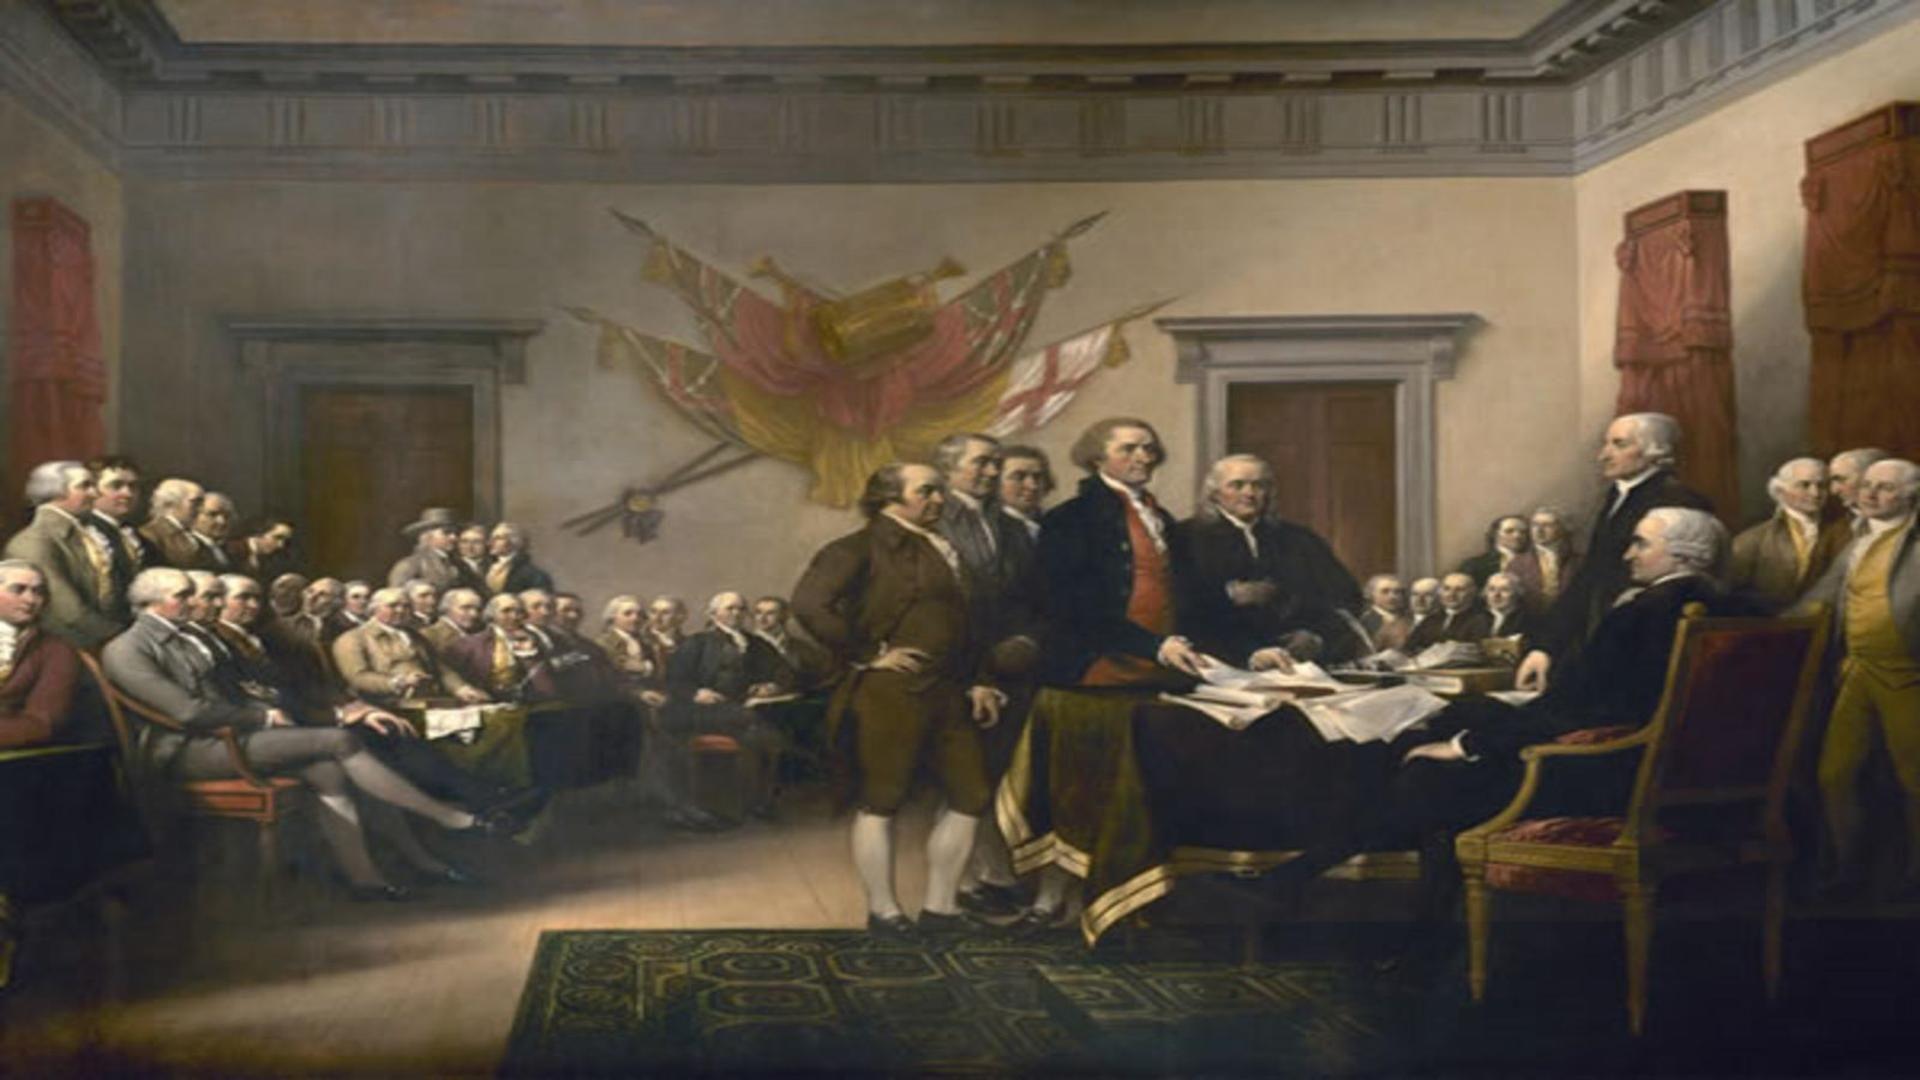 Declaration independence fine art painting reproduction free